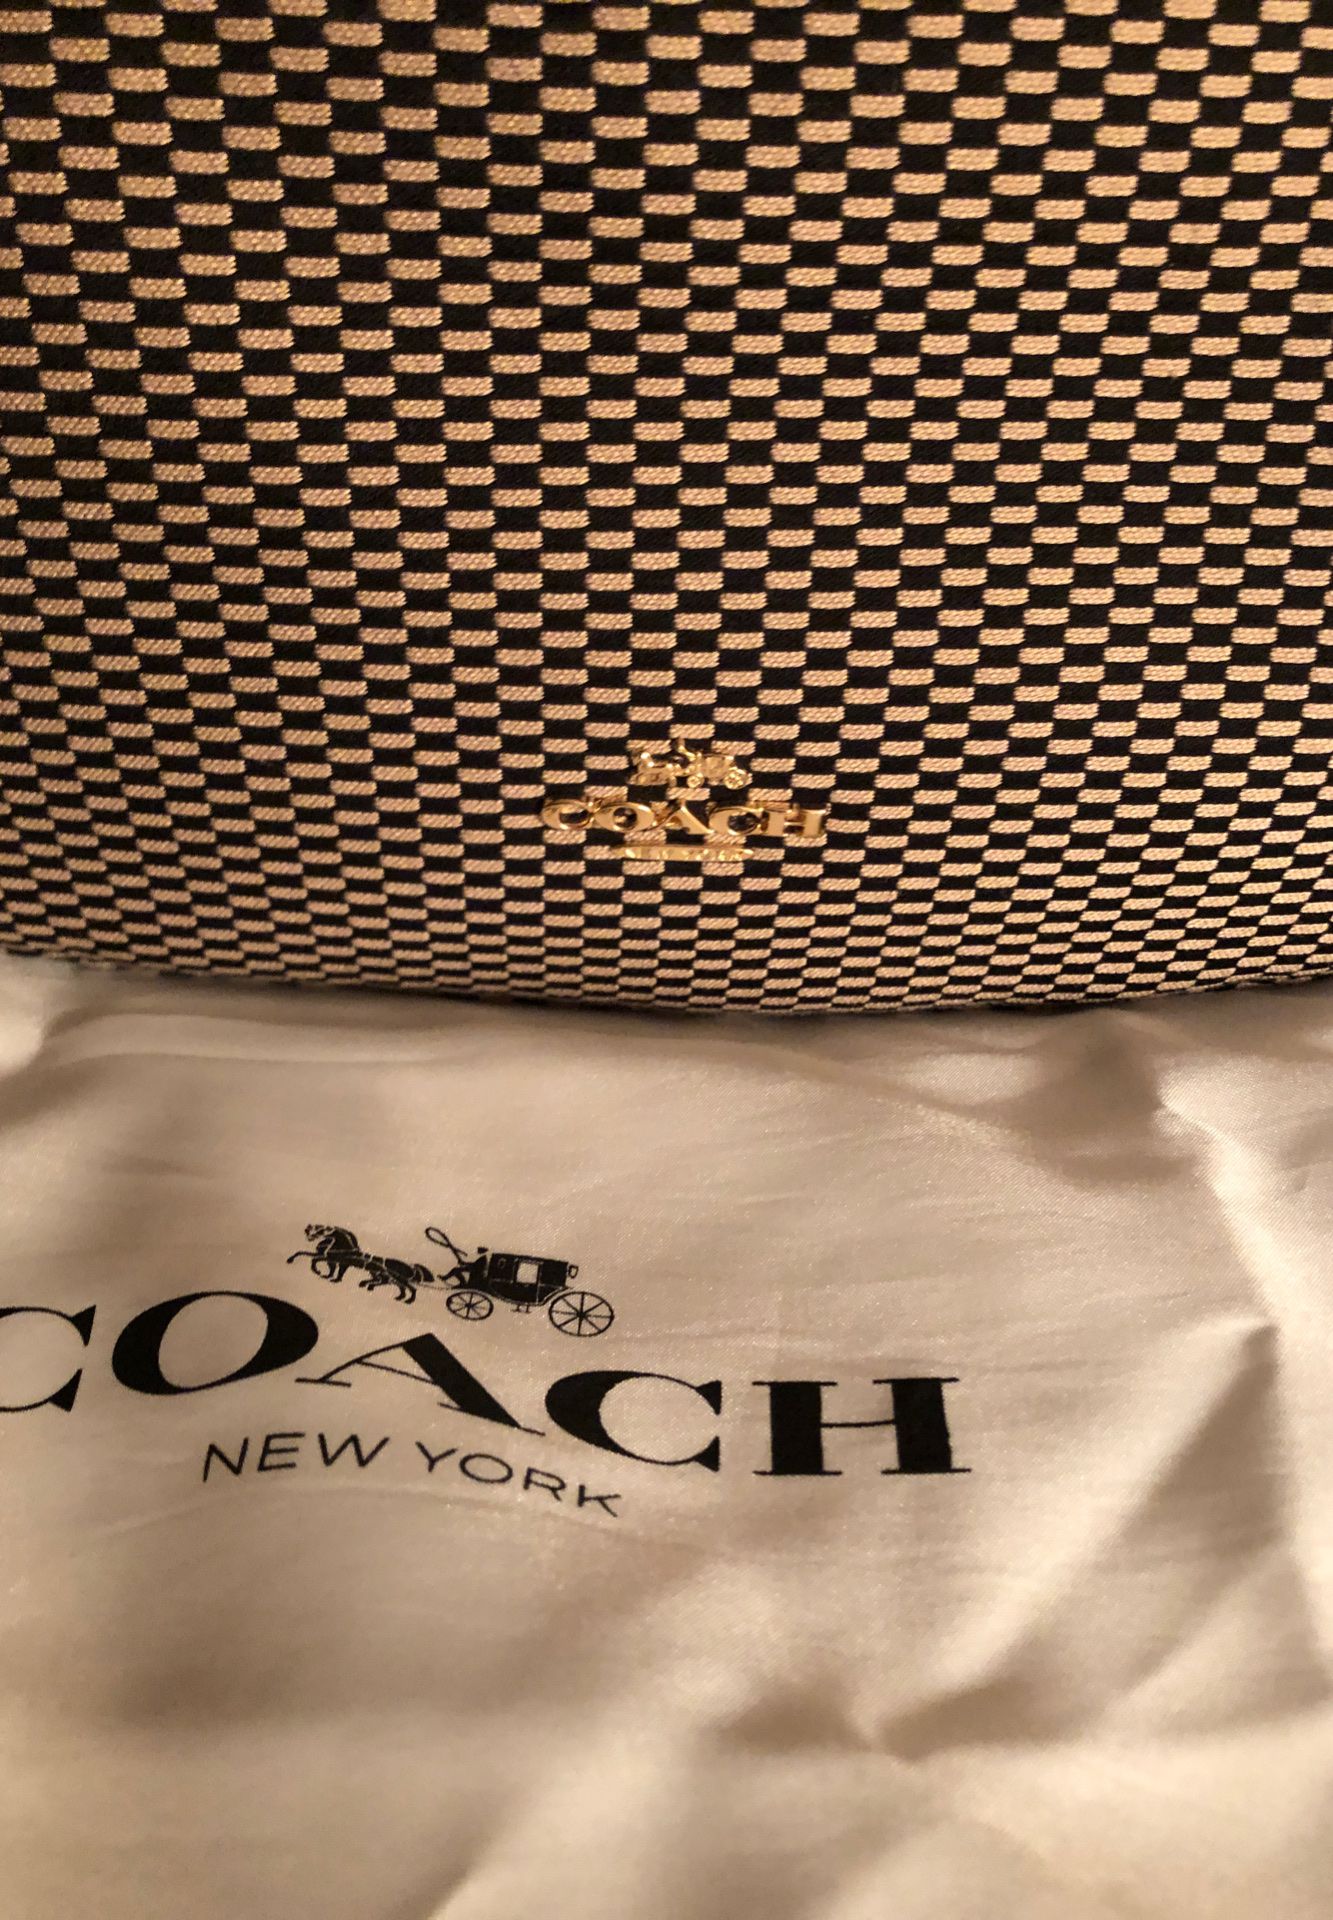 This Black and Beige Coach upper shoulder/ waist shoulder. Comes with dust bag. In good condition. Like new.